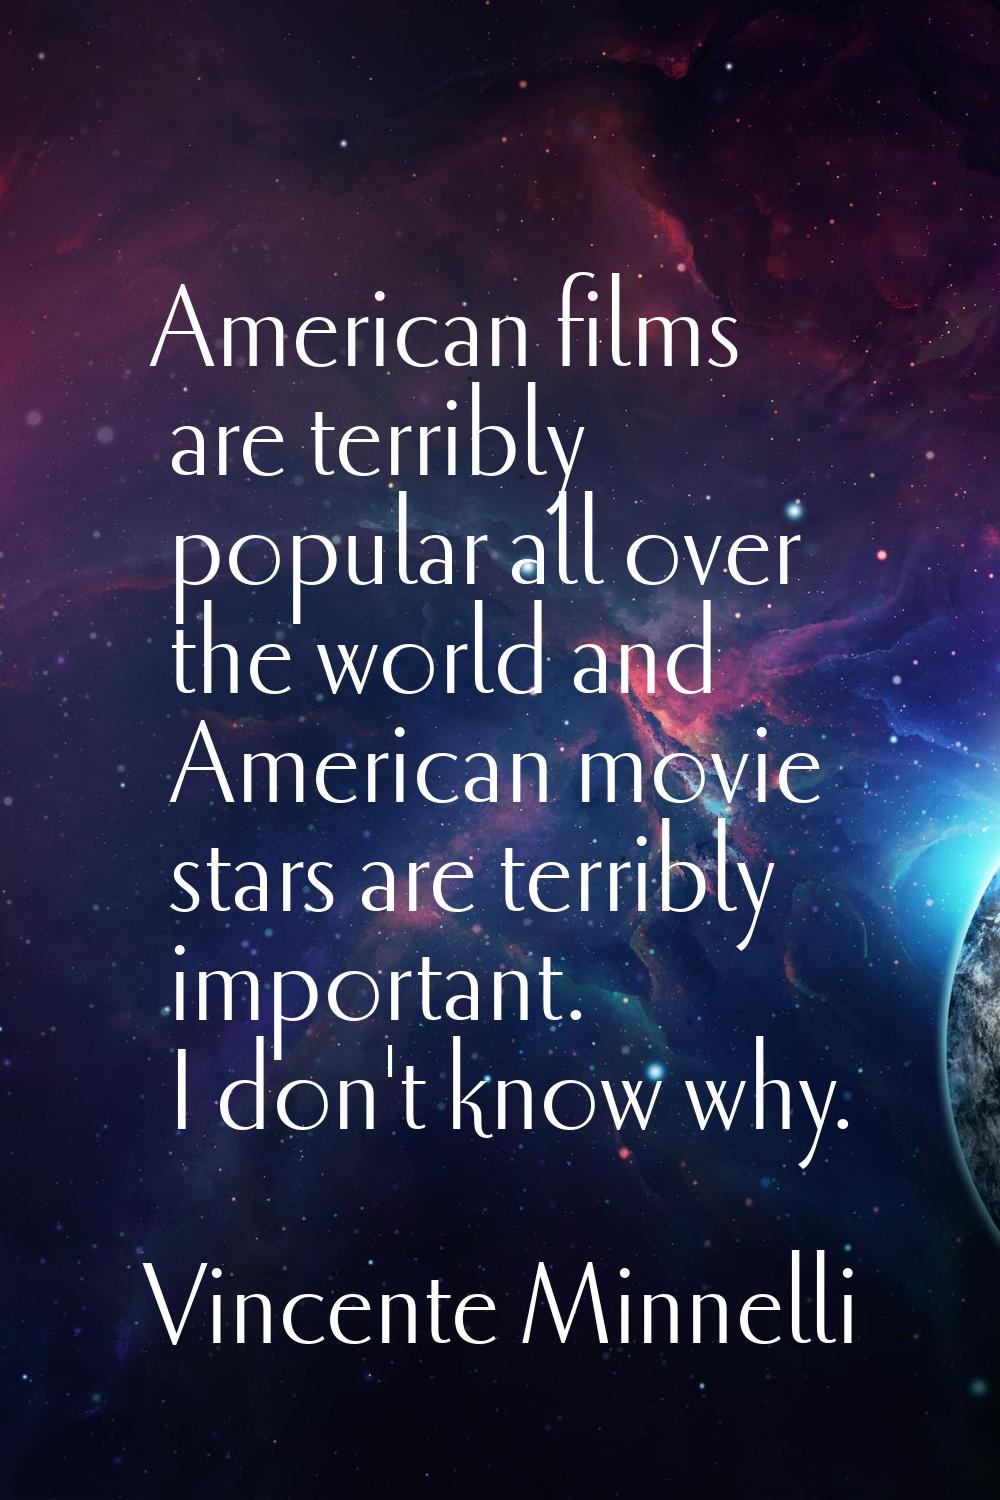 American films are terribly popular all over the world and American movie stars are terribly import